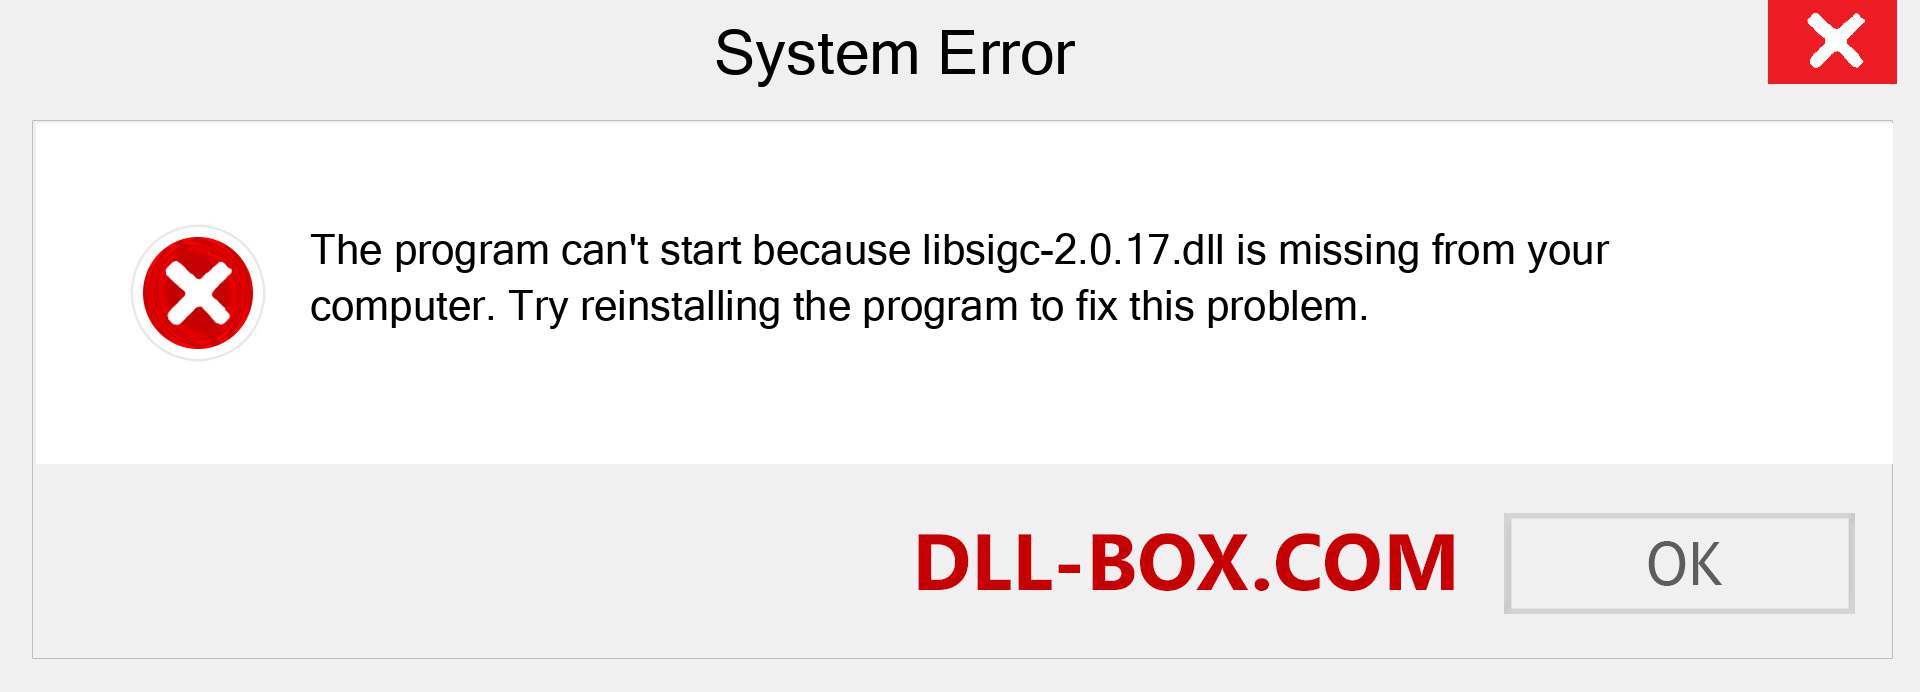  libsigc-2.0.17.dll file is missing?. Download for Windows 7, 8, 10 - Fix  libsigc-2.0.17 dll Missing Error on Windows, photos, images